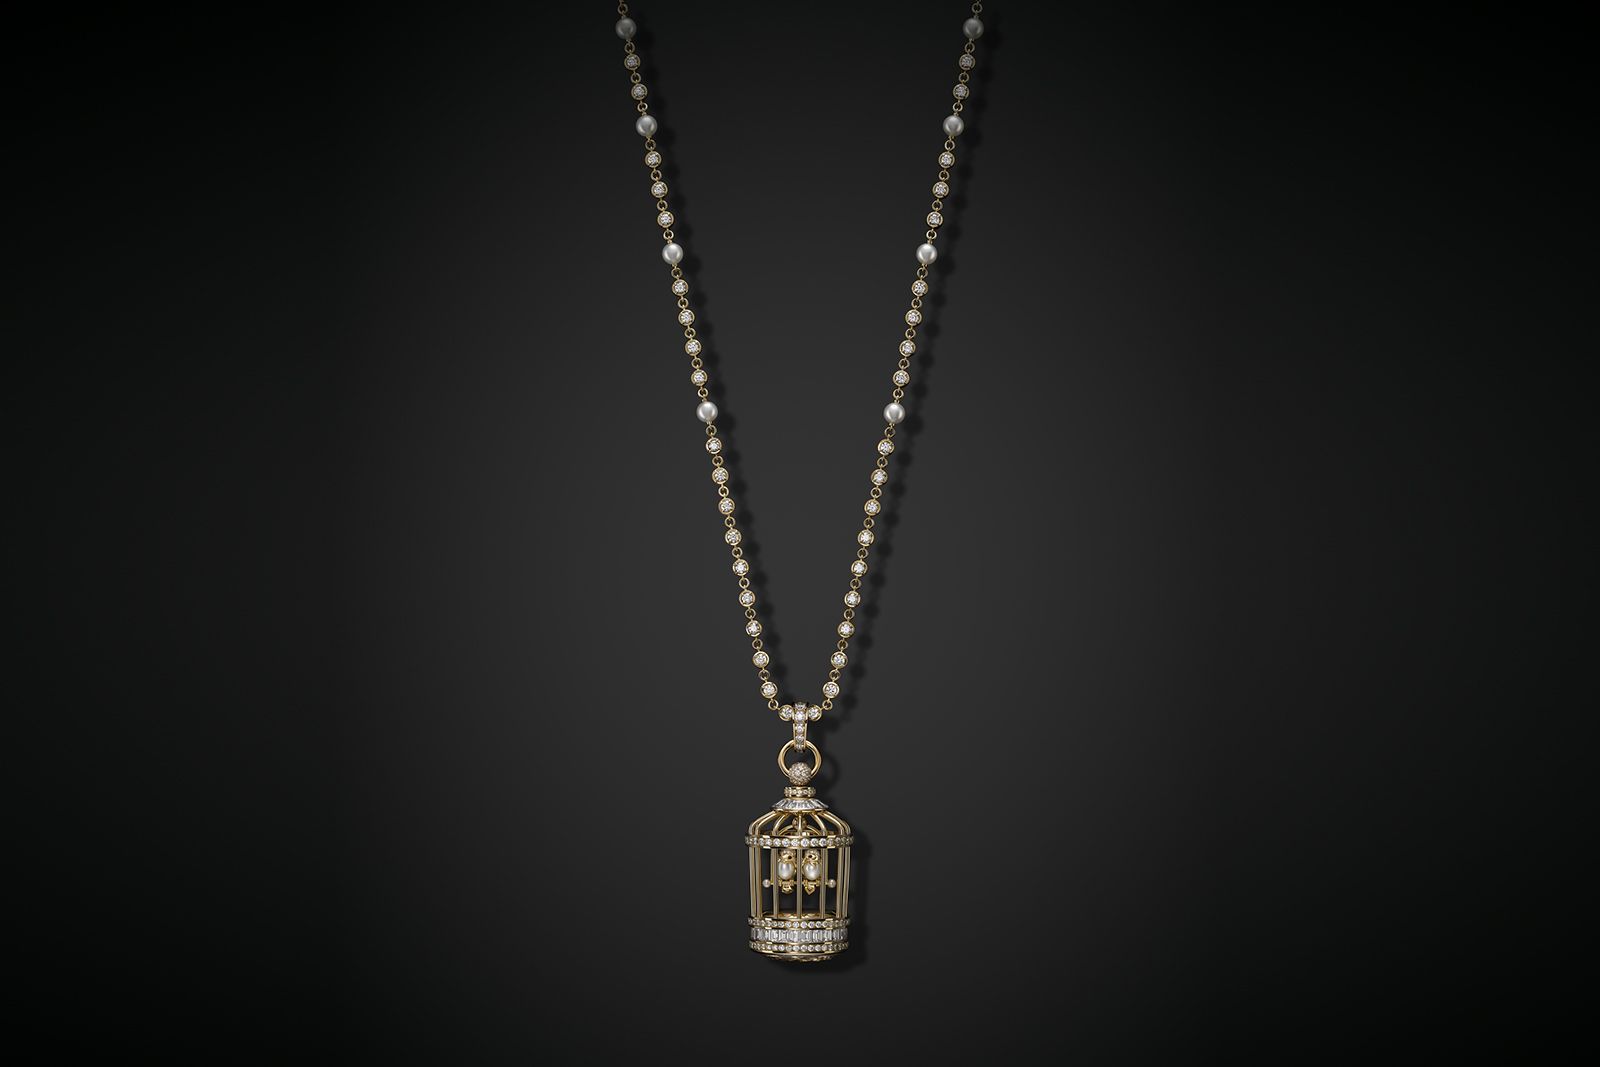 Mademoiselle Prive Cage long necklace featuring a hidden watch dial under the cage